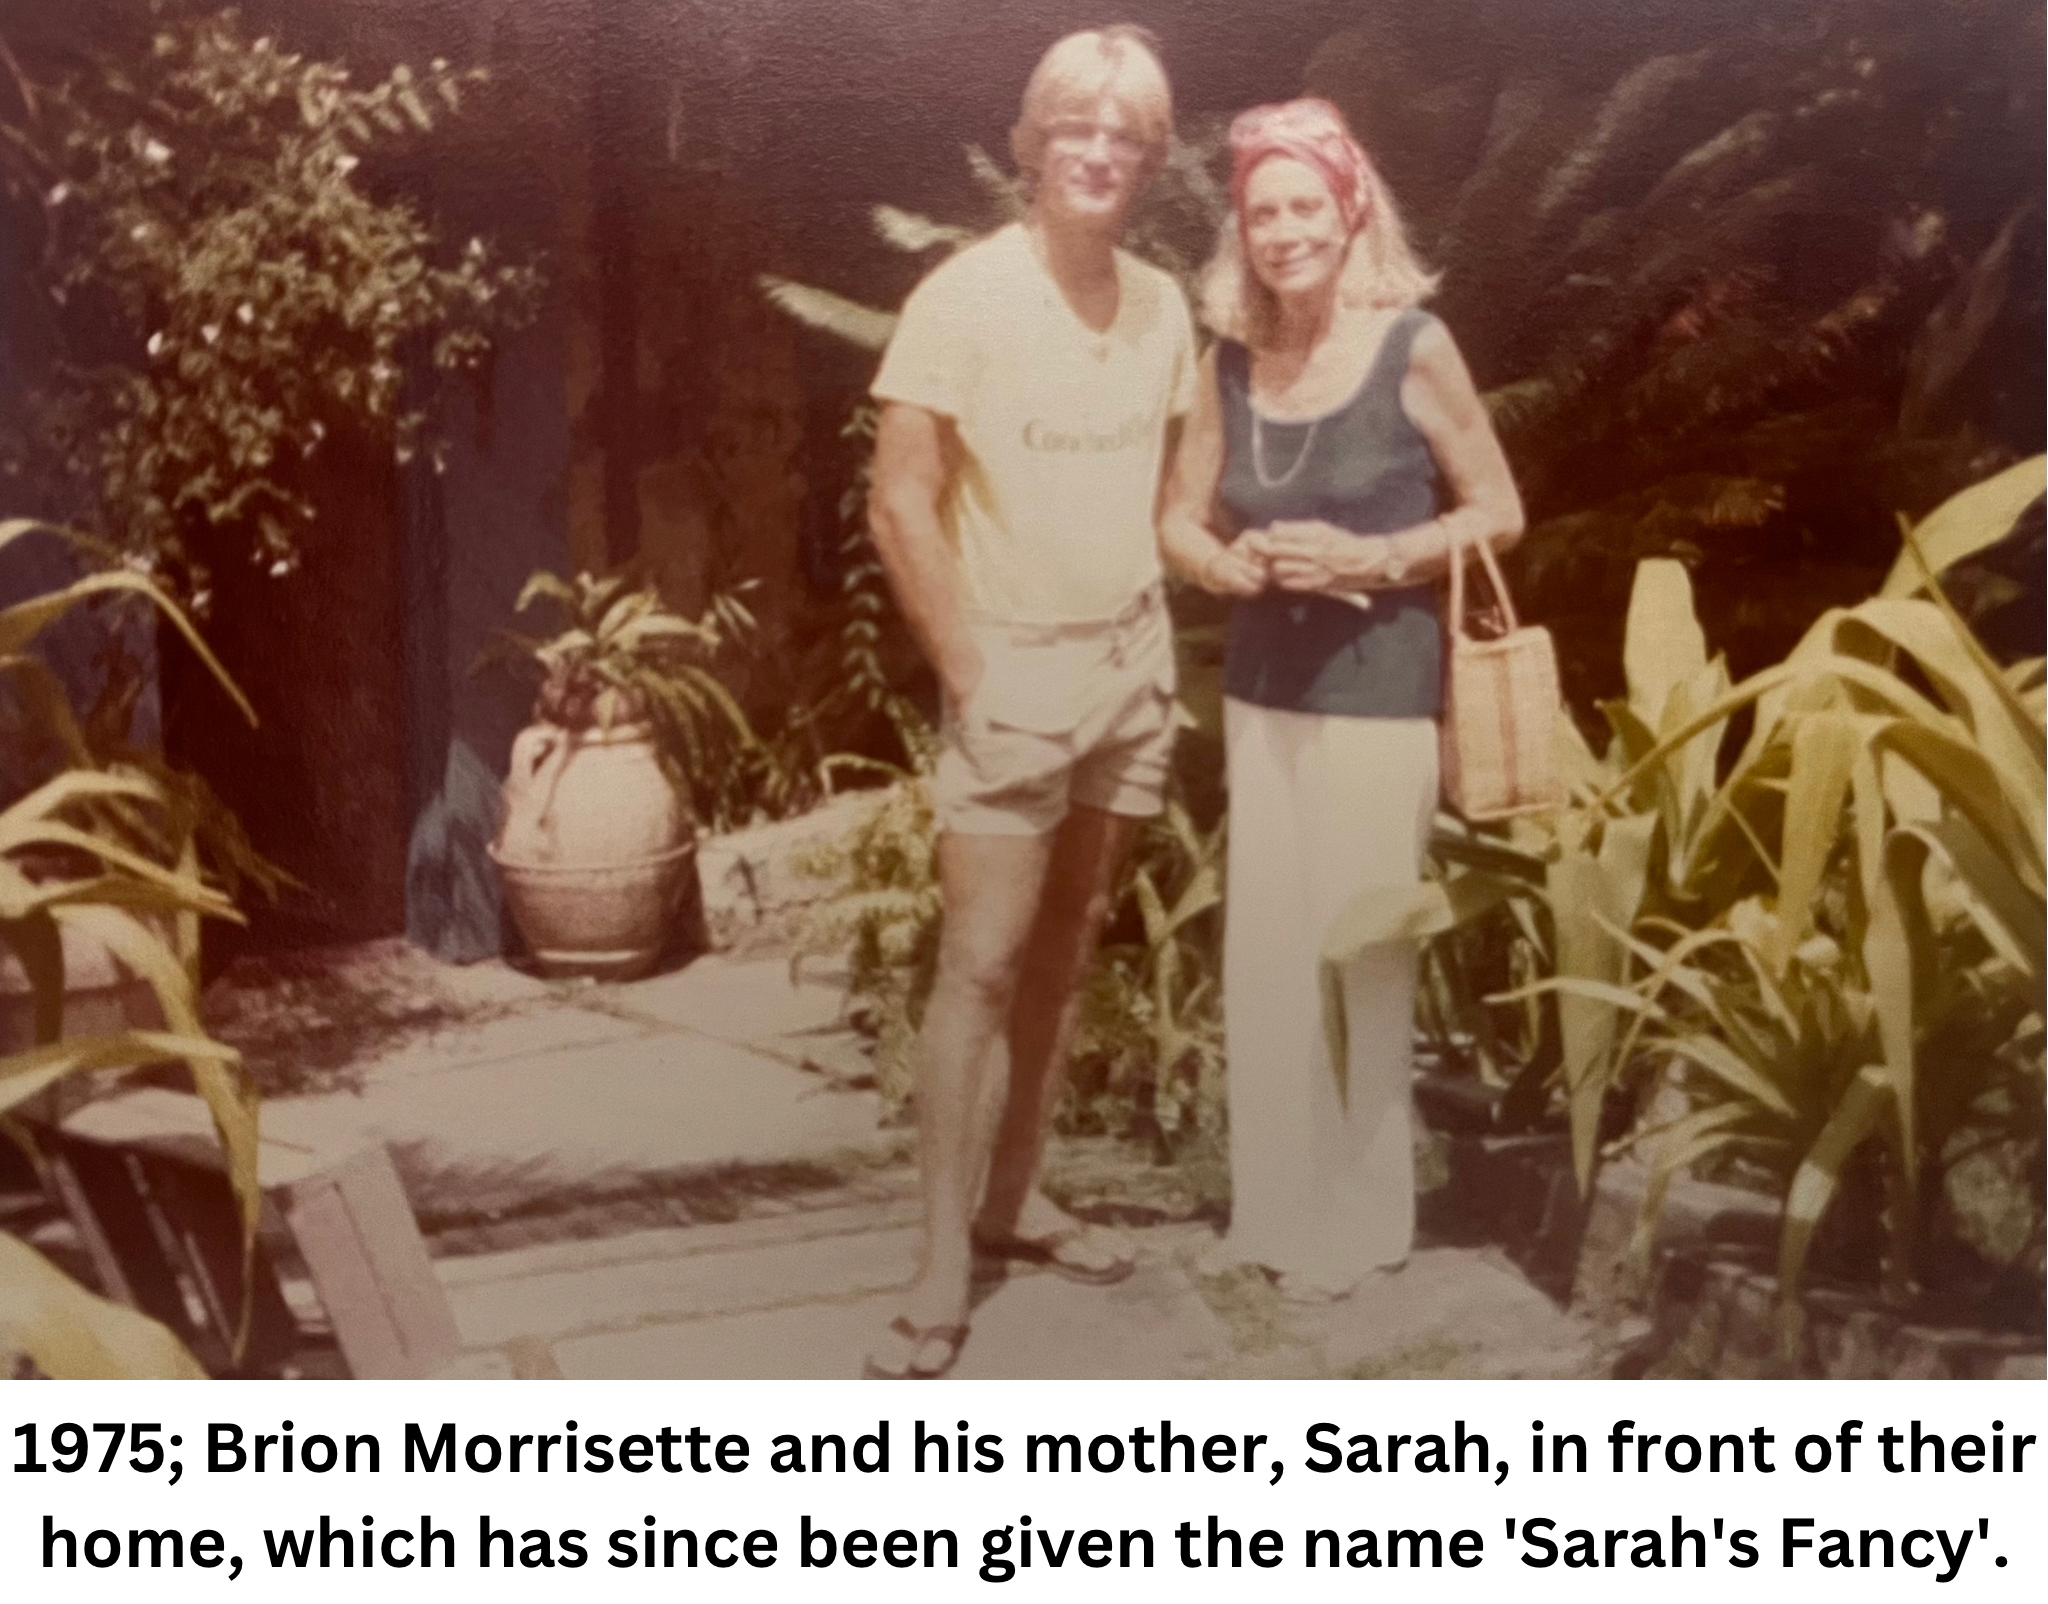 Brion Morrisette and his mother Sarah